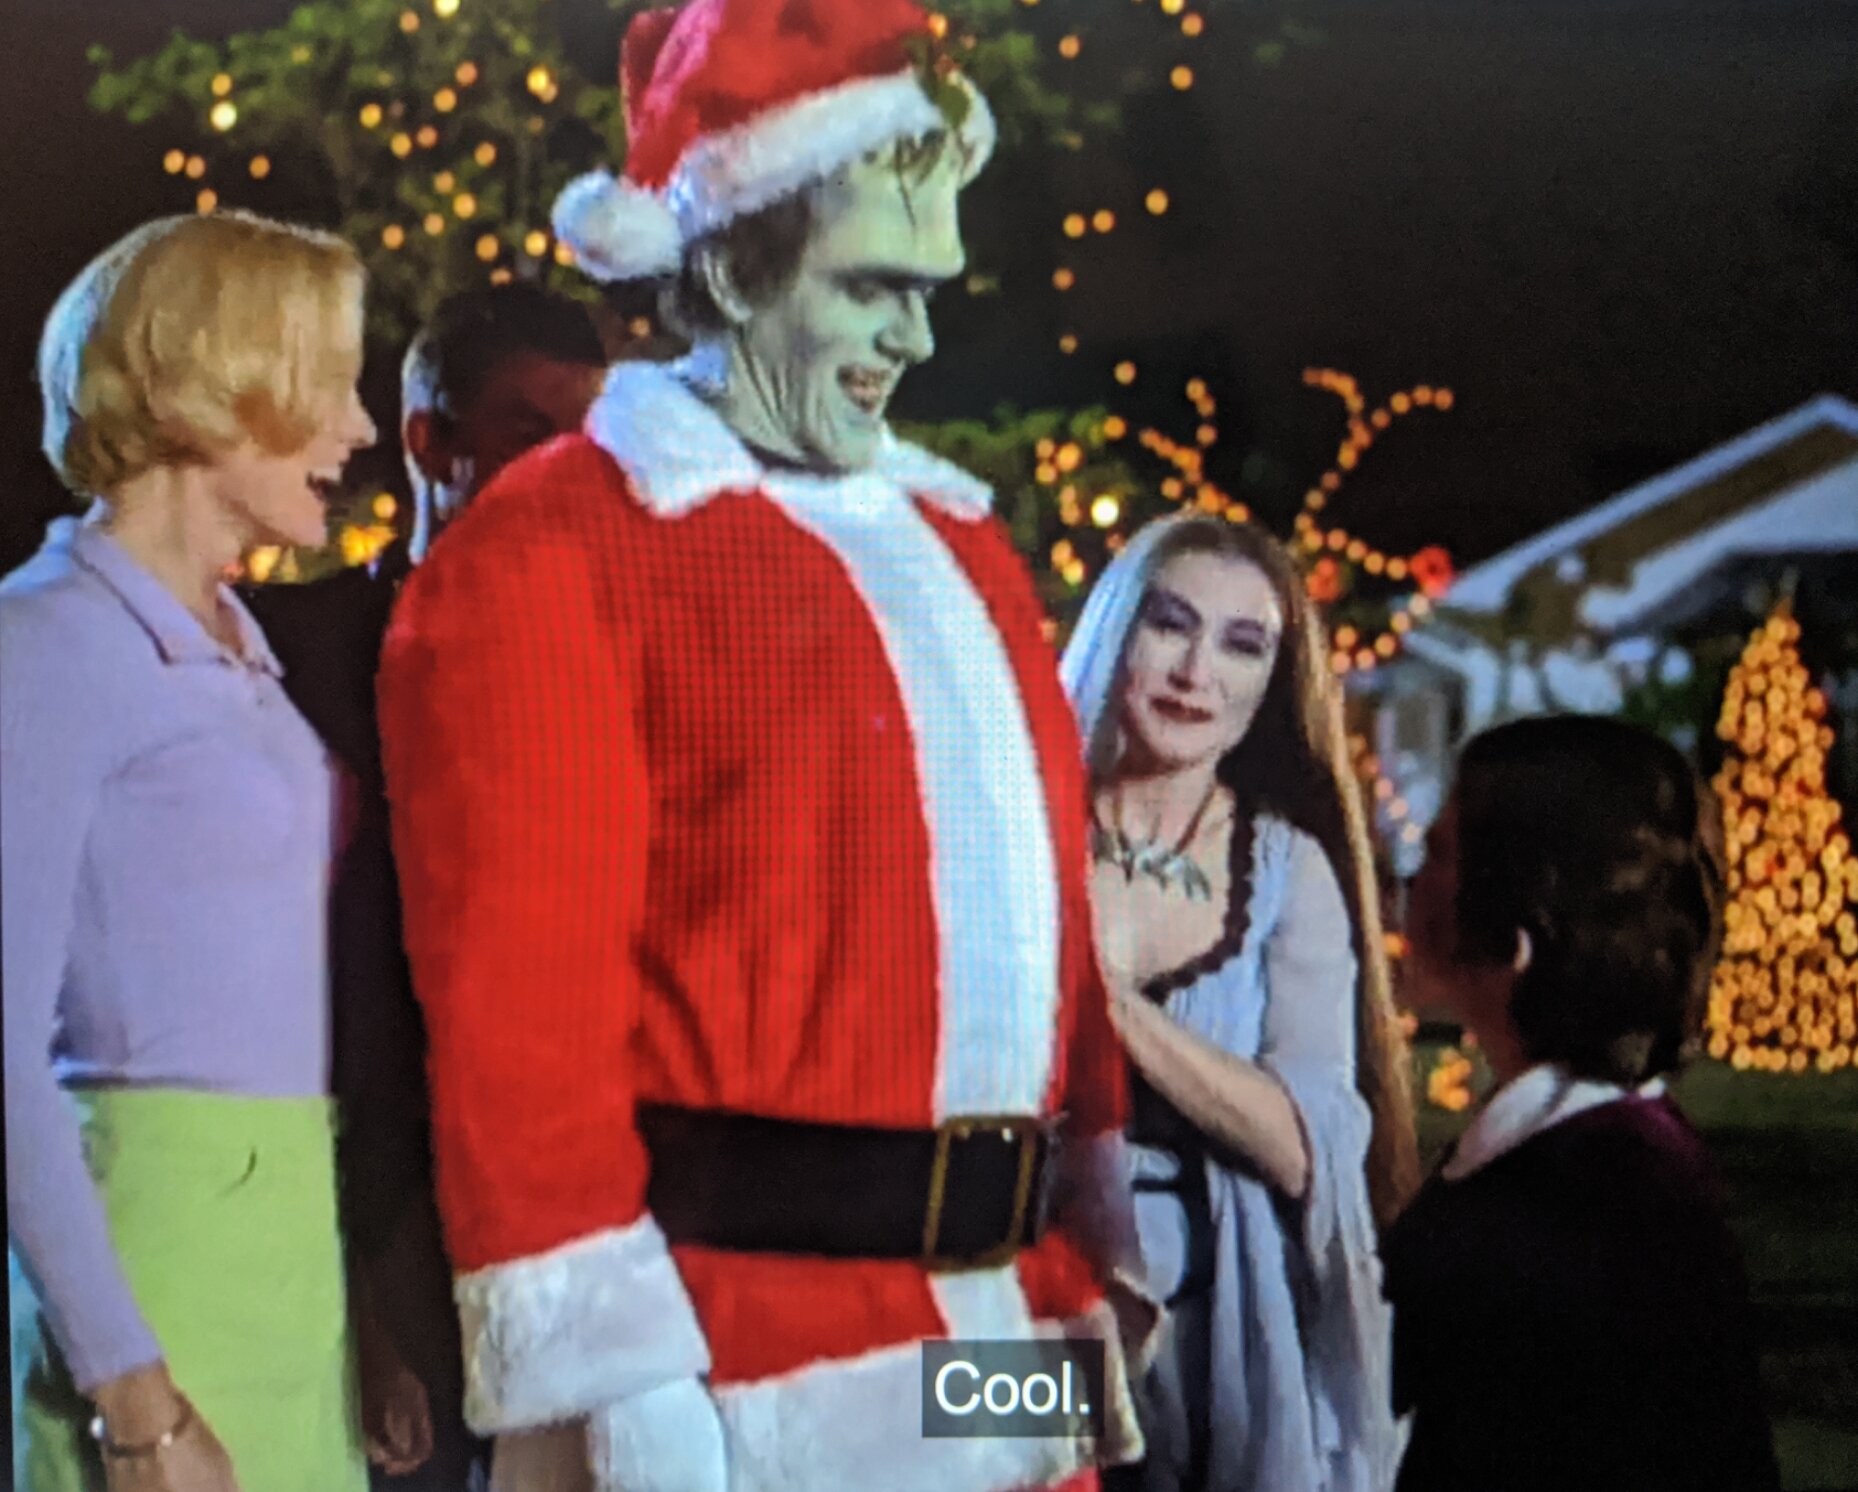 Rainbow Christmas 2019 The Munsters' Scary Little Christmas: A Horny Holiday Film For the ...